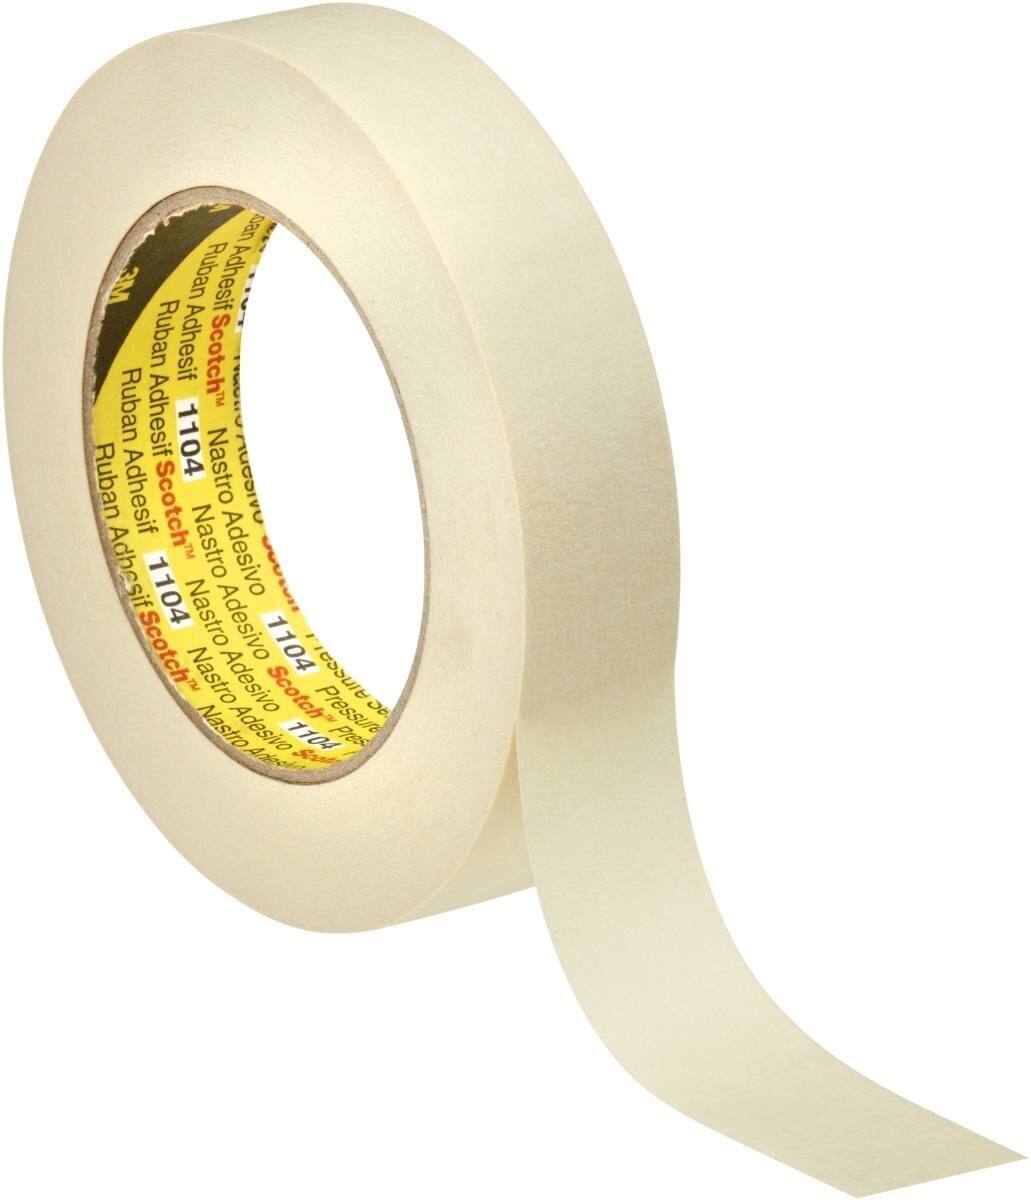 3M Scotch Special Painting Masking Tape 1104, Beige, 24 mm x 50 m, 0.155 mm